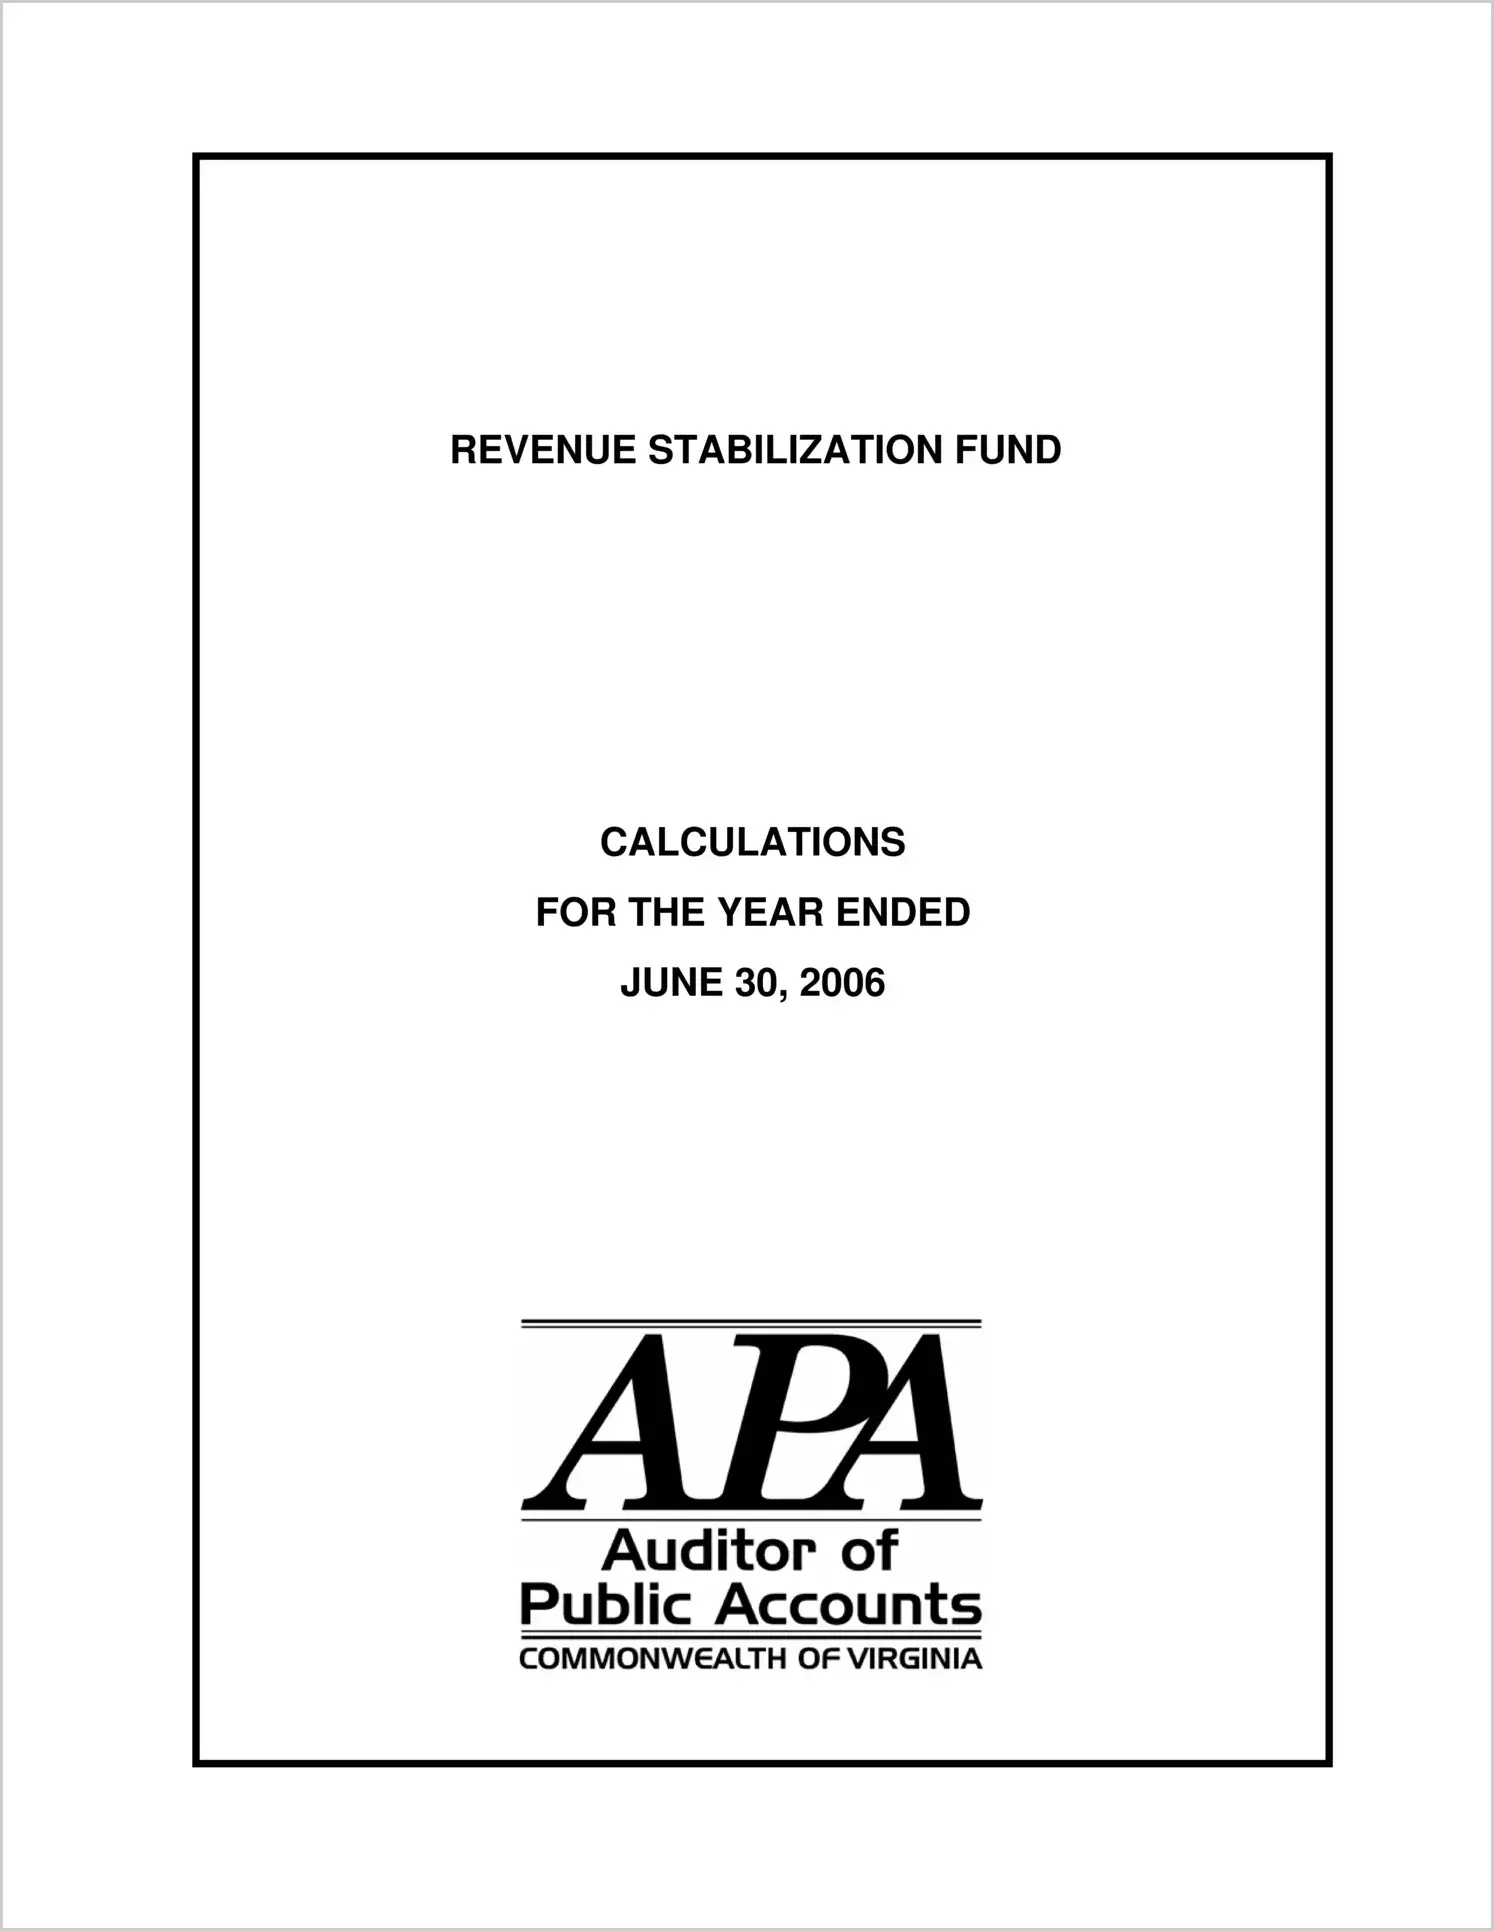 Special ReportReport of the Required Calculations for the Revenue Stabilization Fund 2006(Report Date: 10/26/2006)